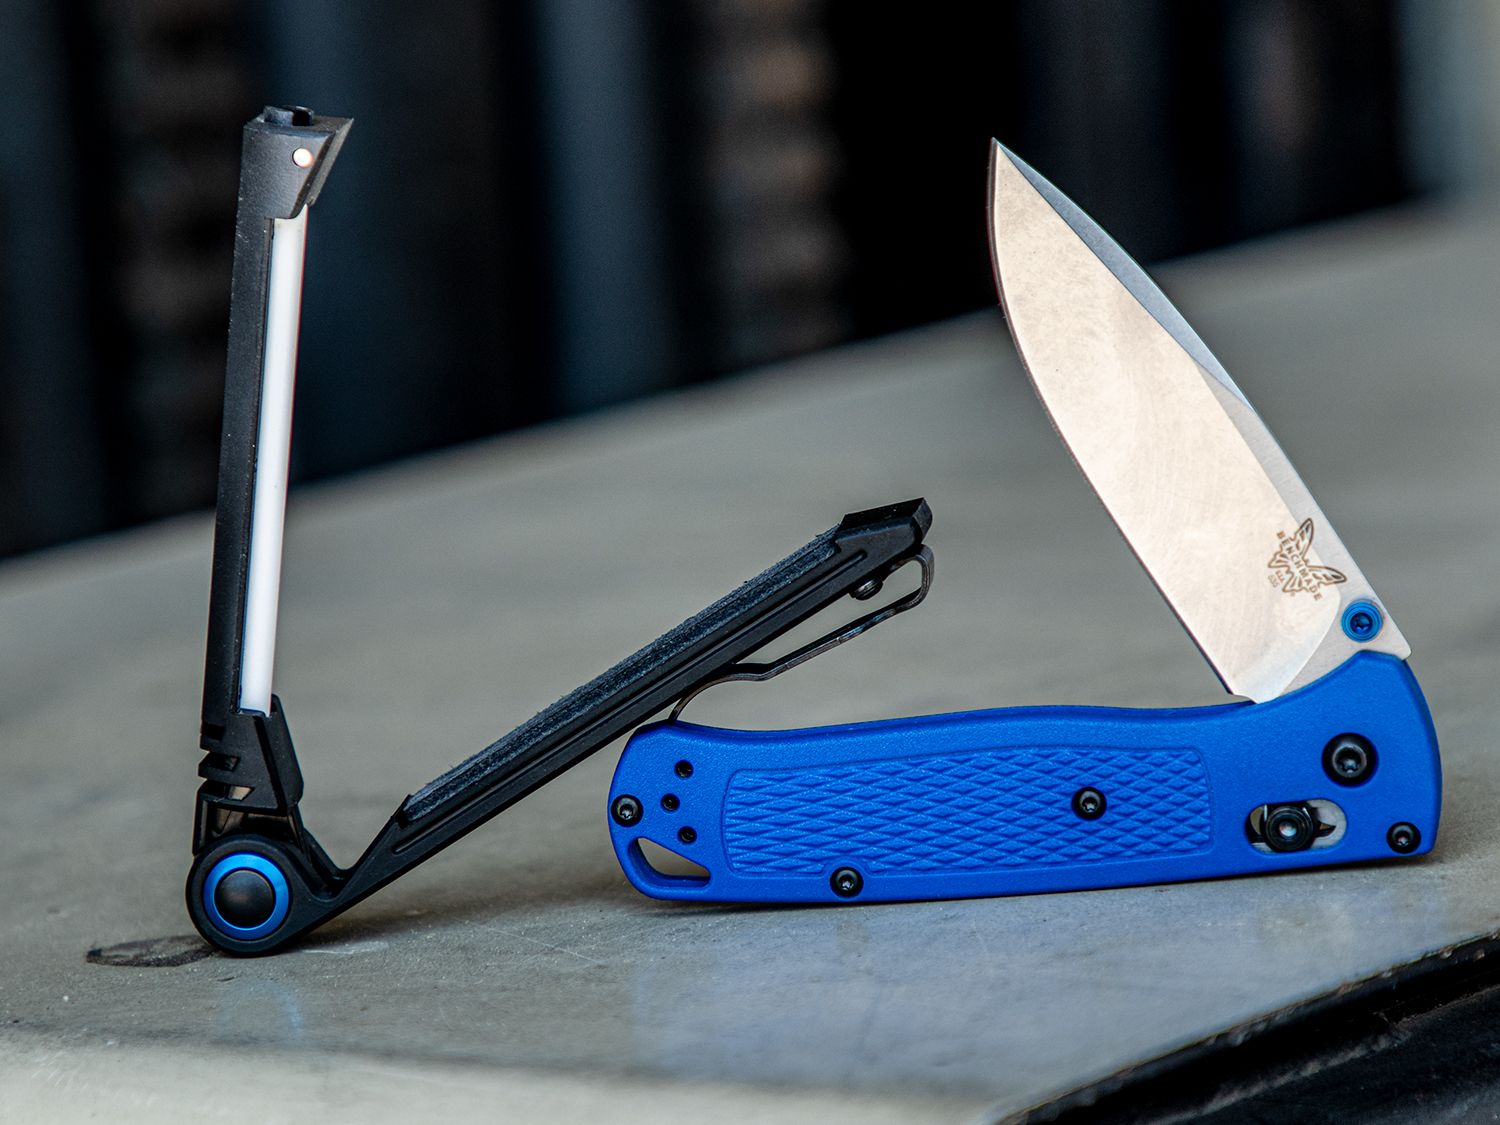 Benchmade Edge Maintenance Tool - Soldier Systems Daily